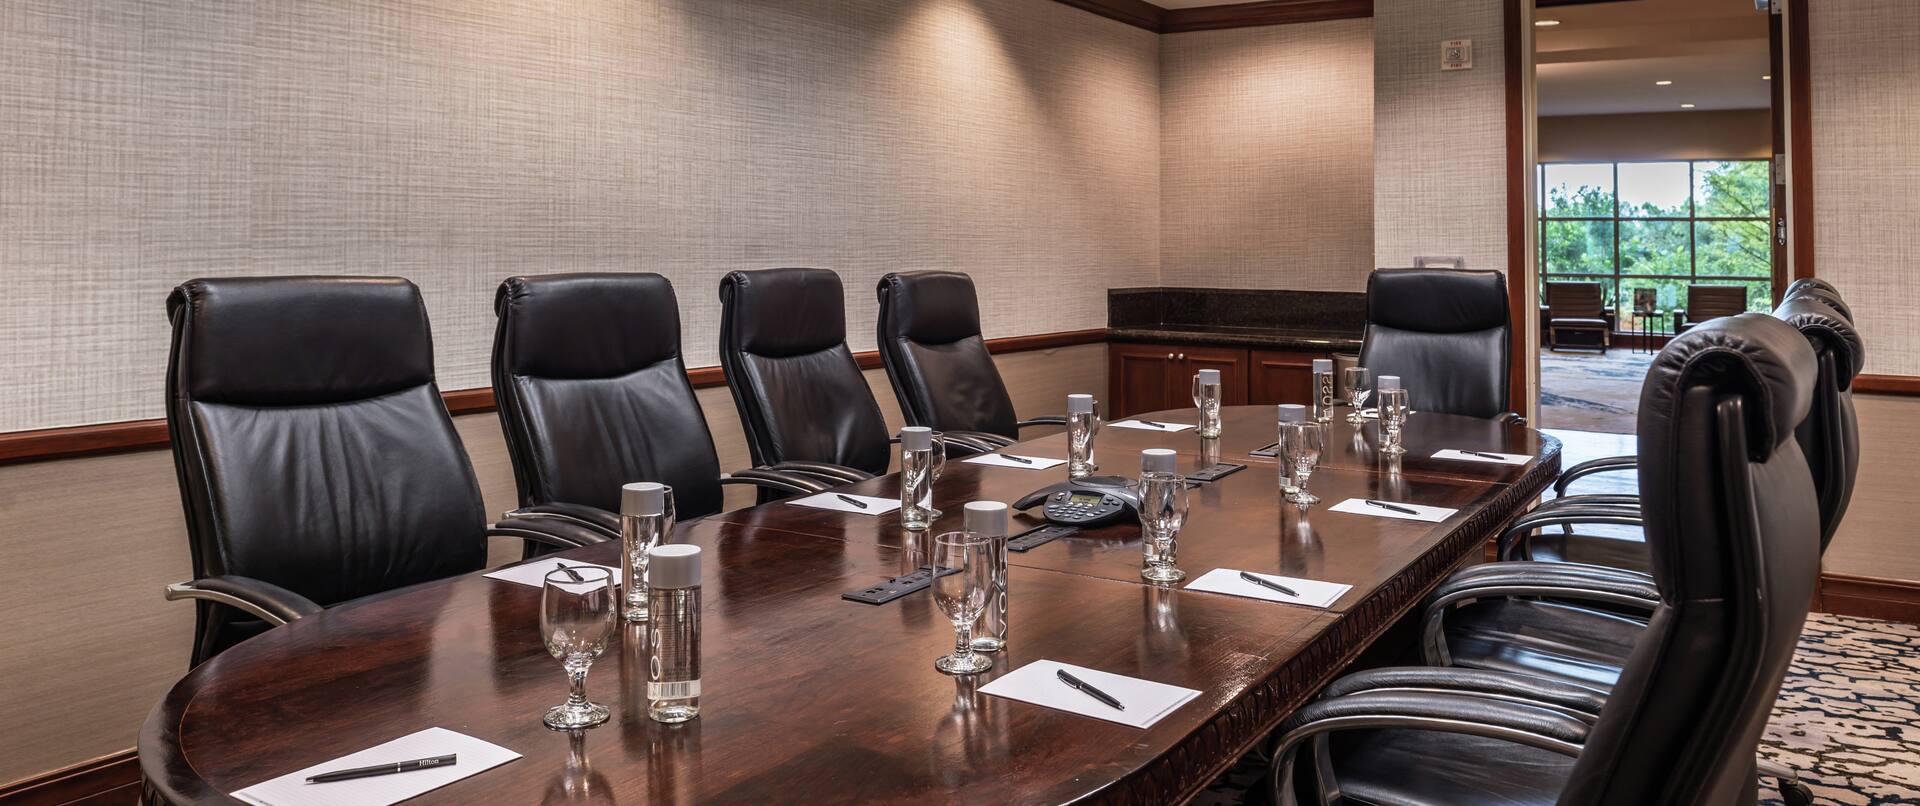 Boardroom Table with Leather Chairs in Meeting Room